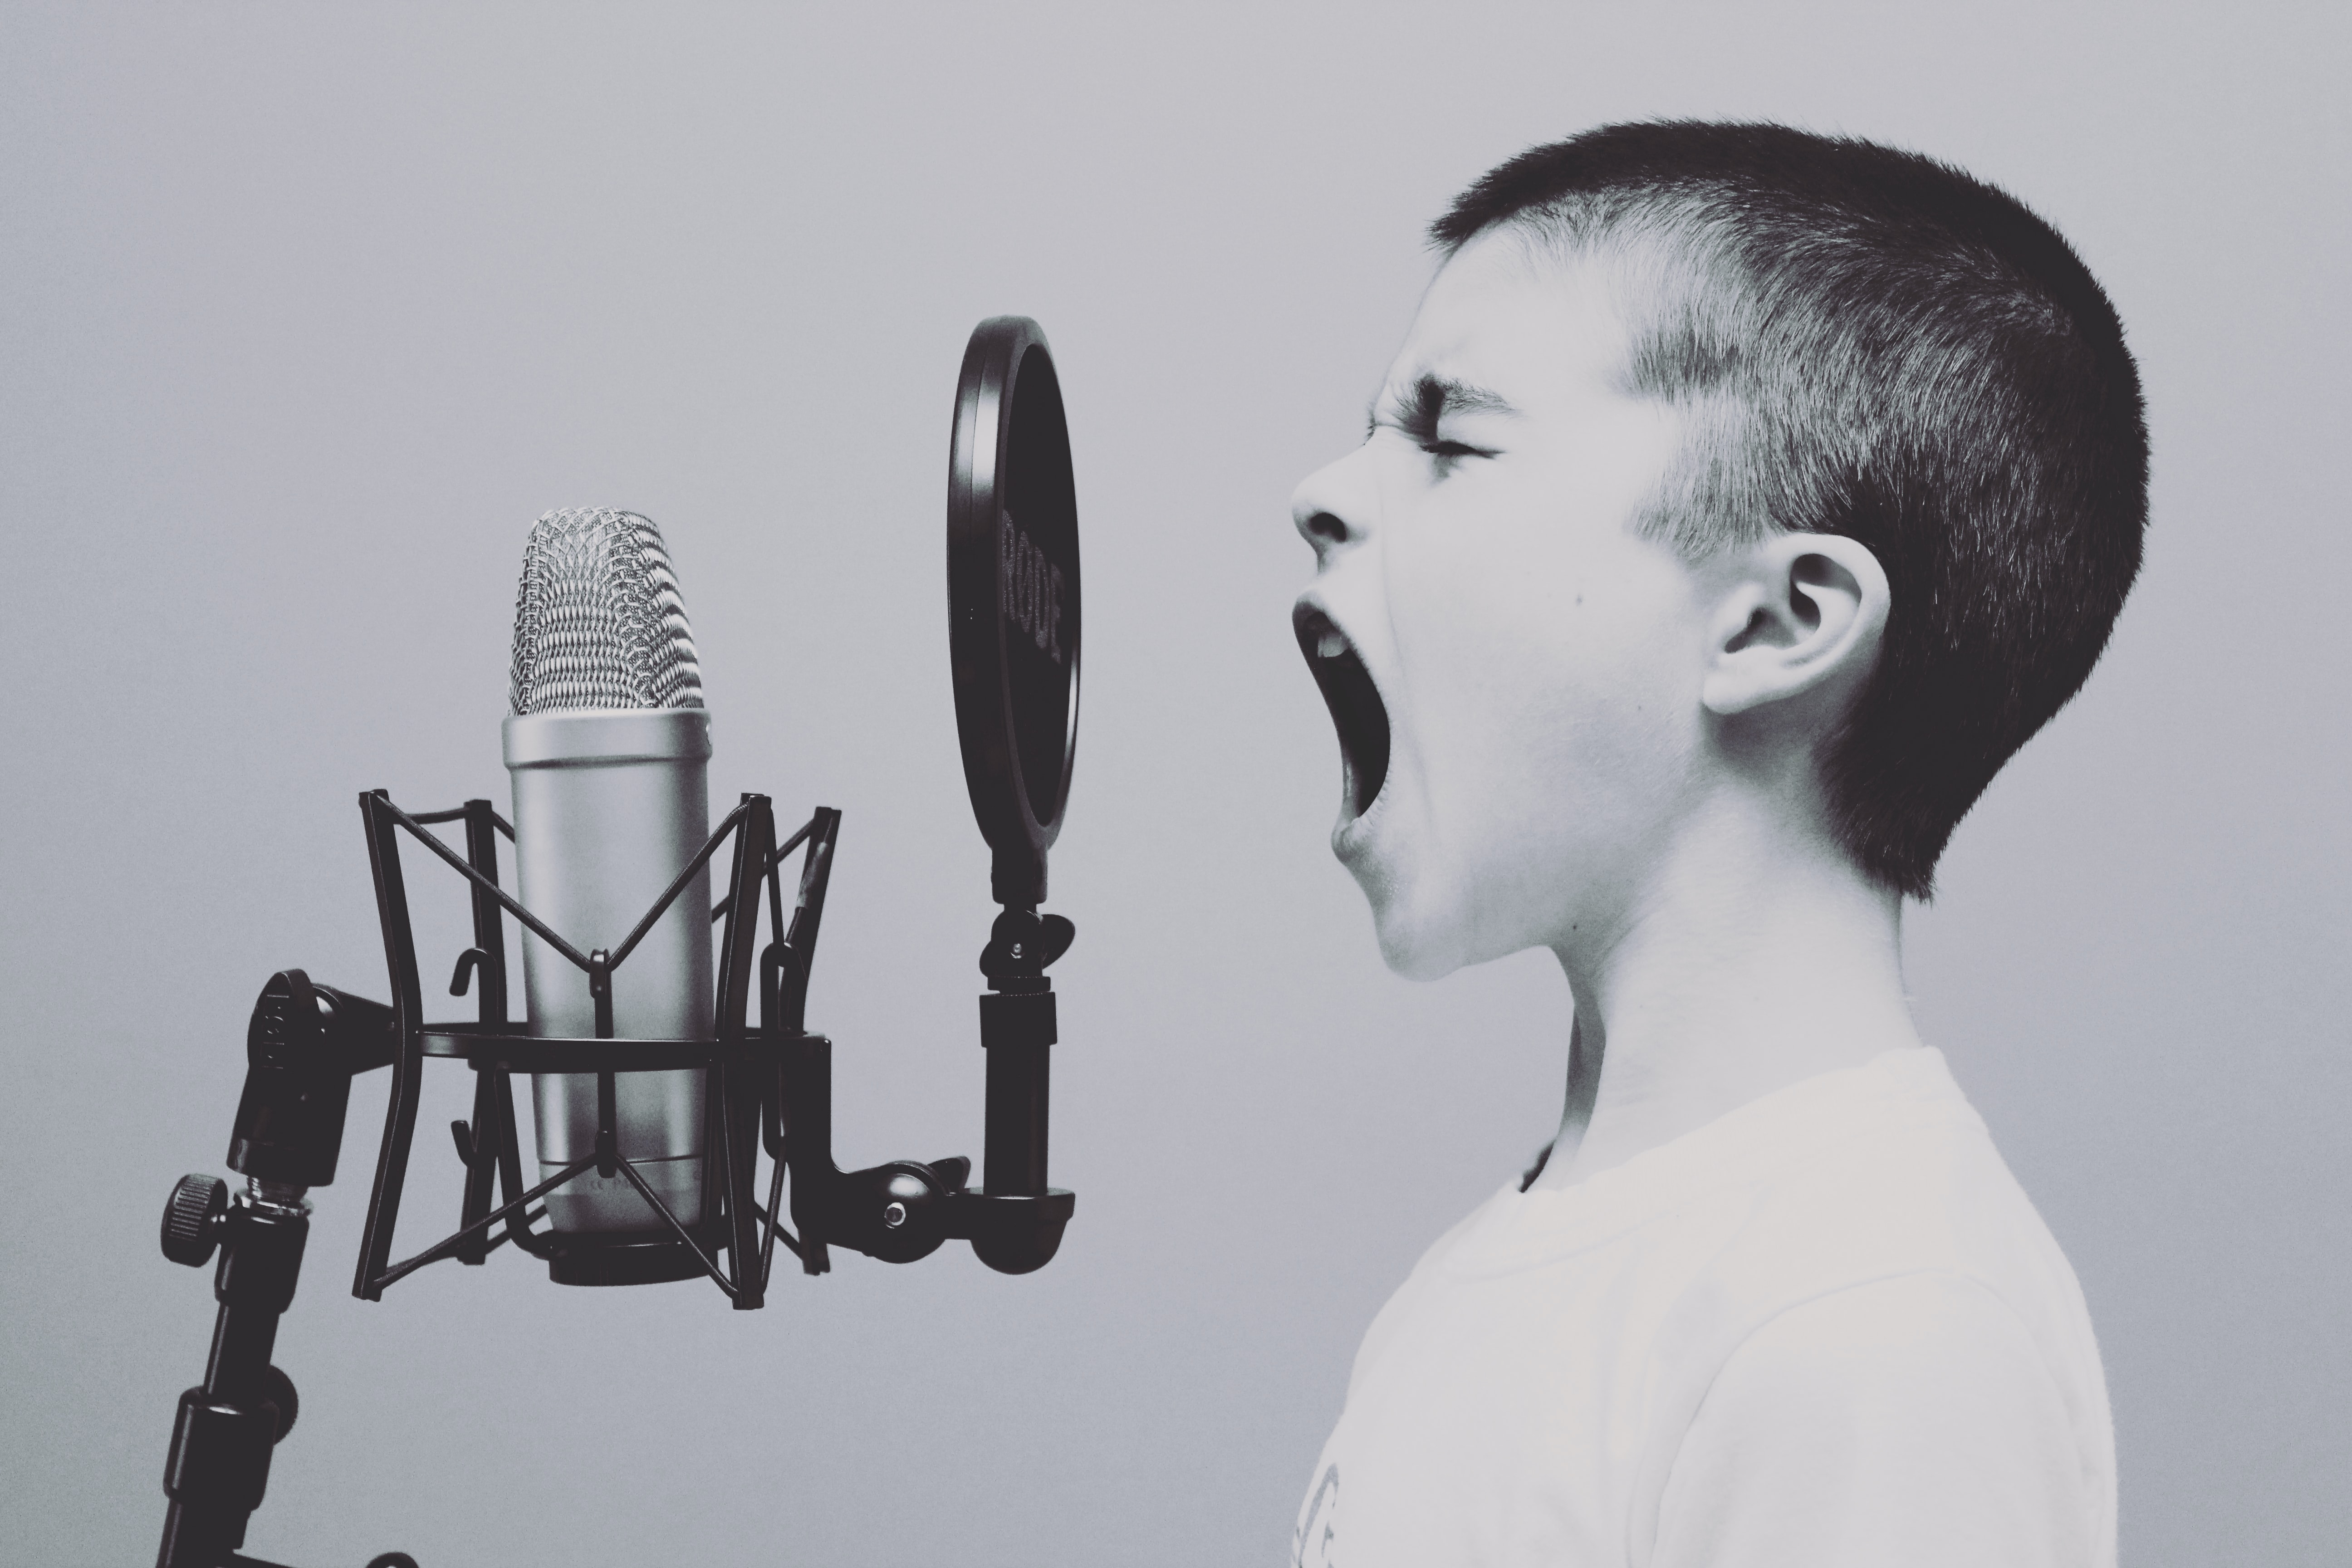 a child screaming into a studio microphone